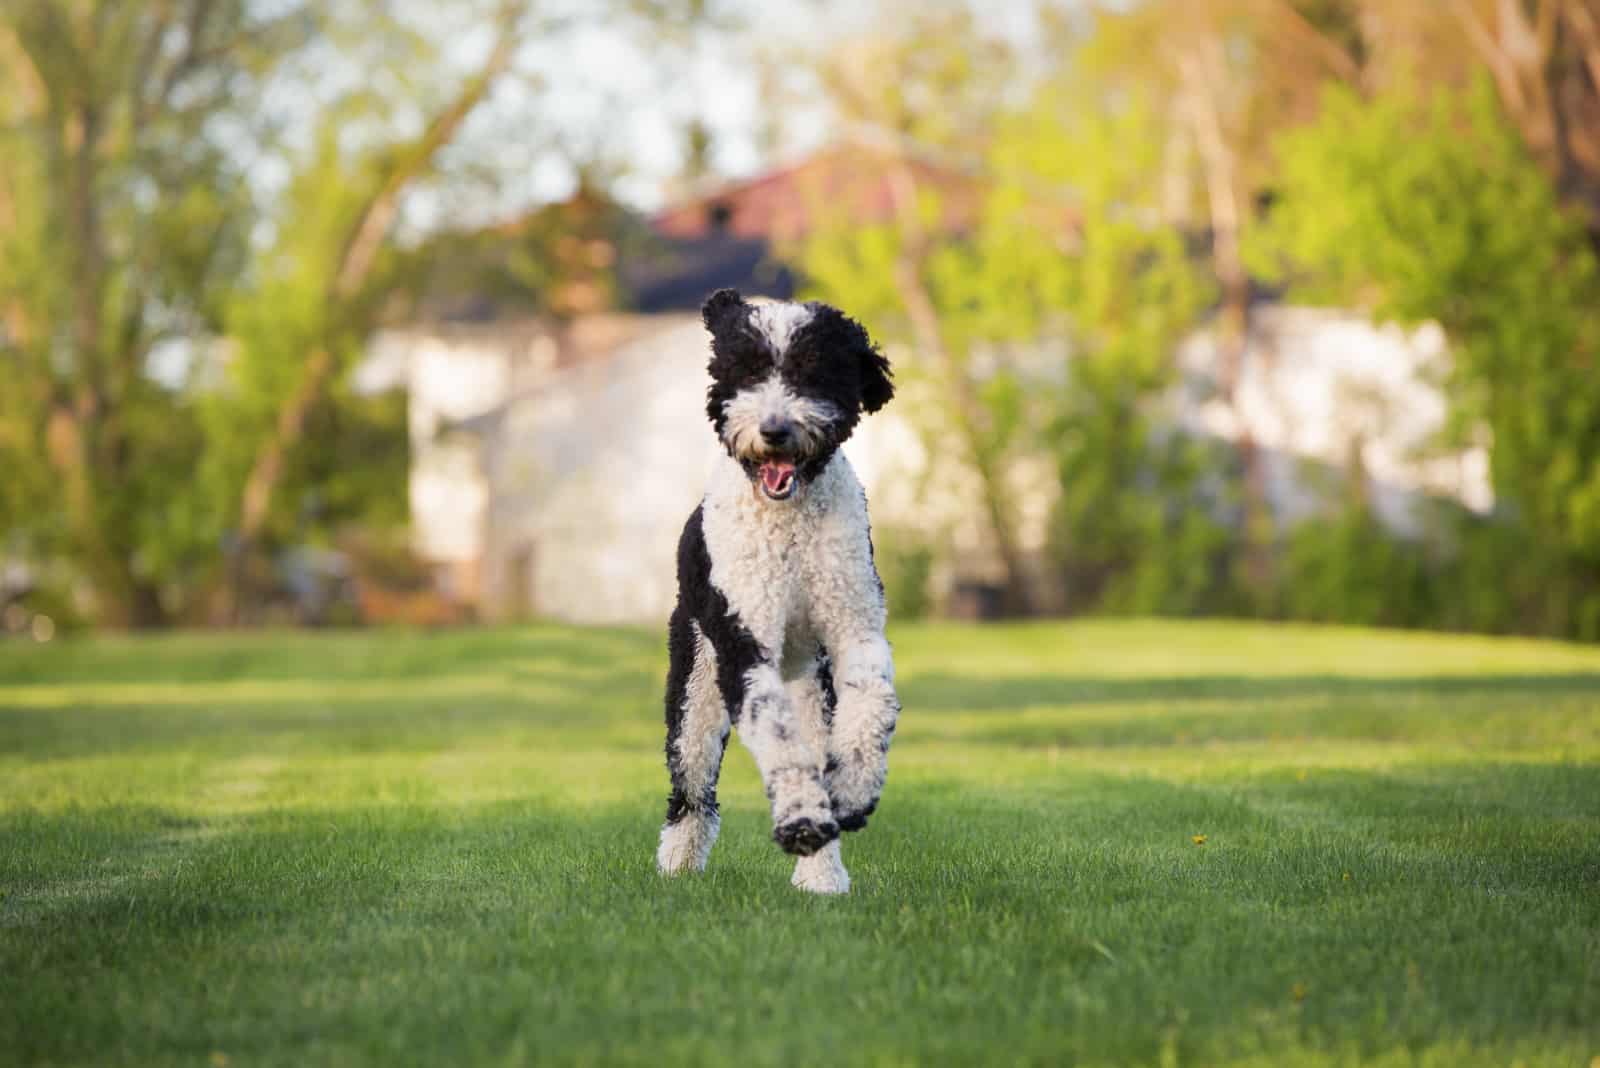 Sheepadoodle dog running in the park